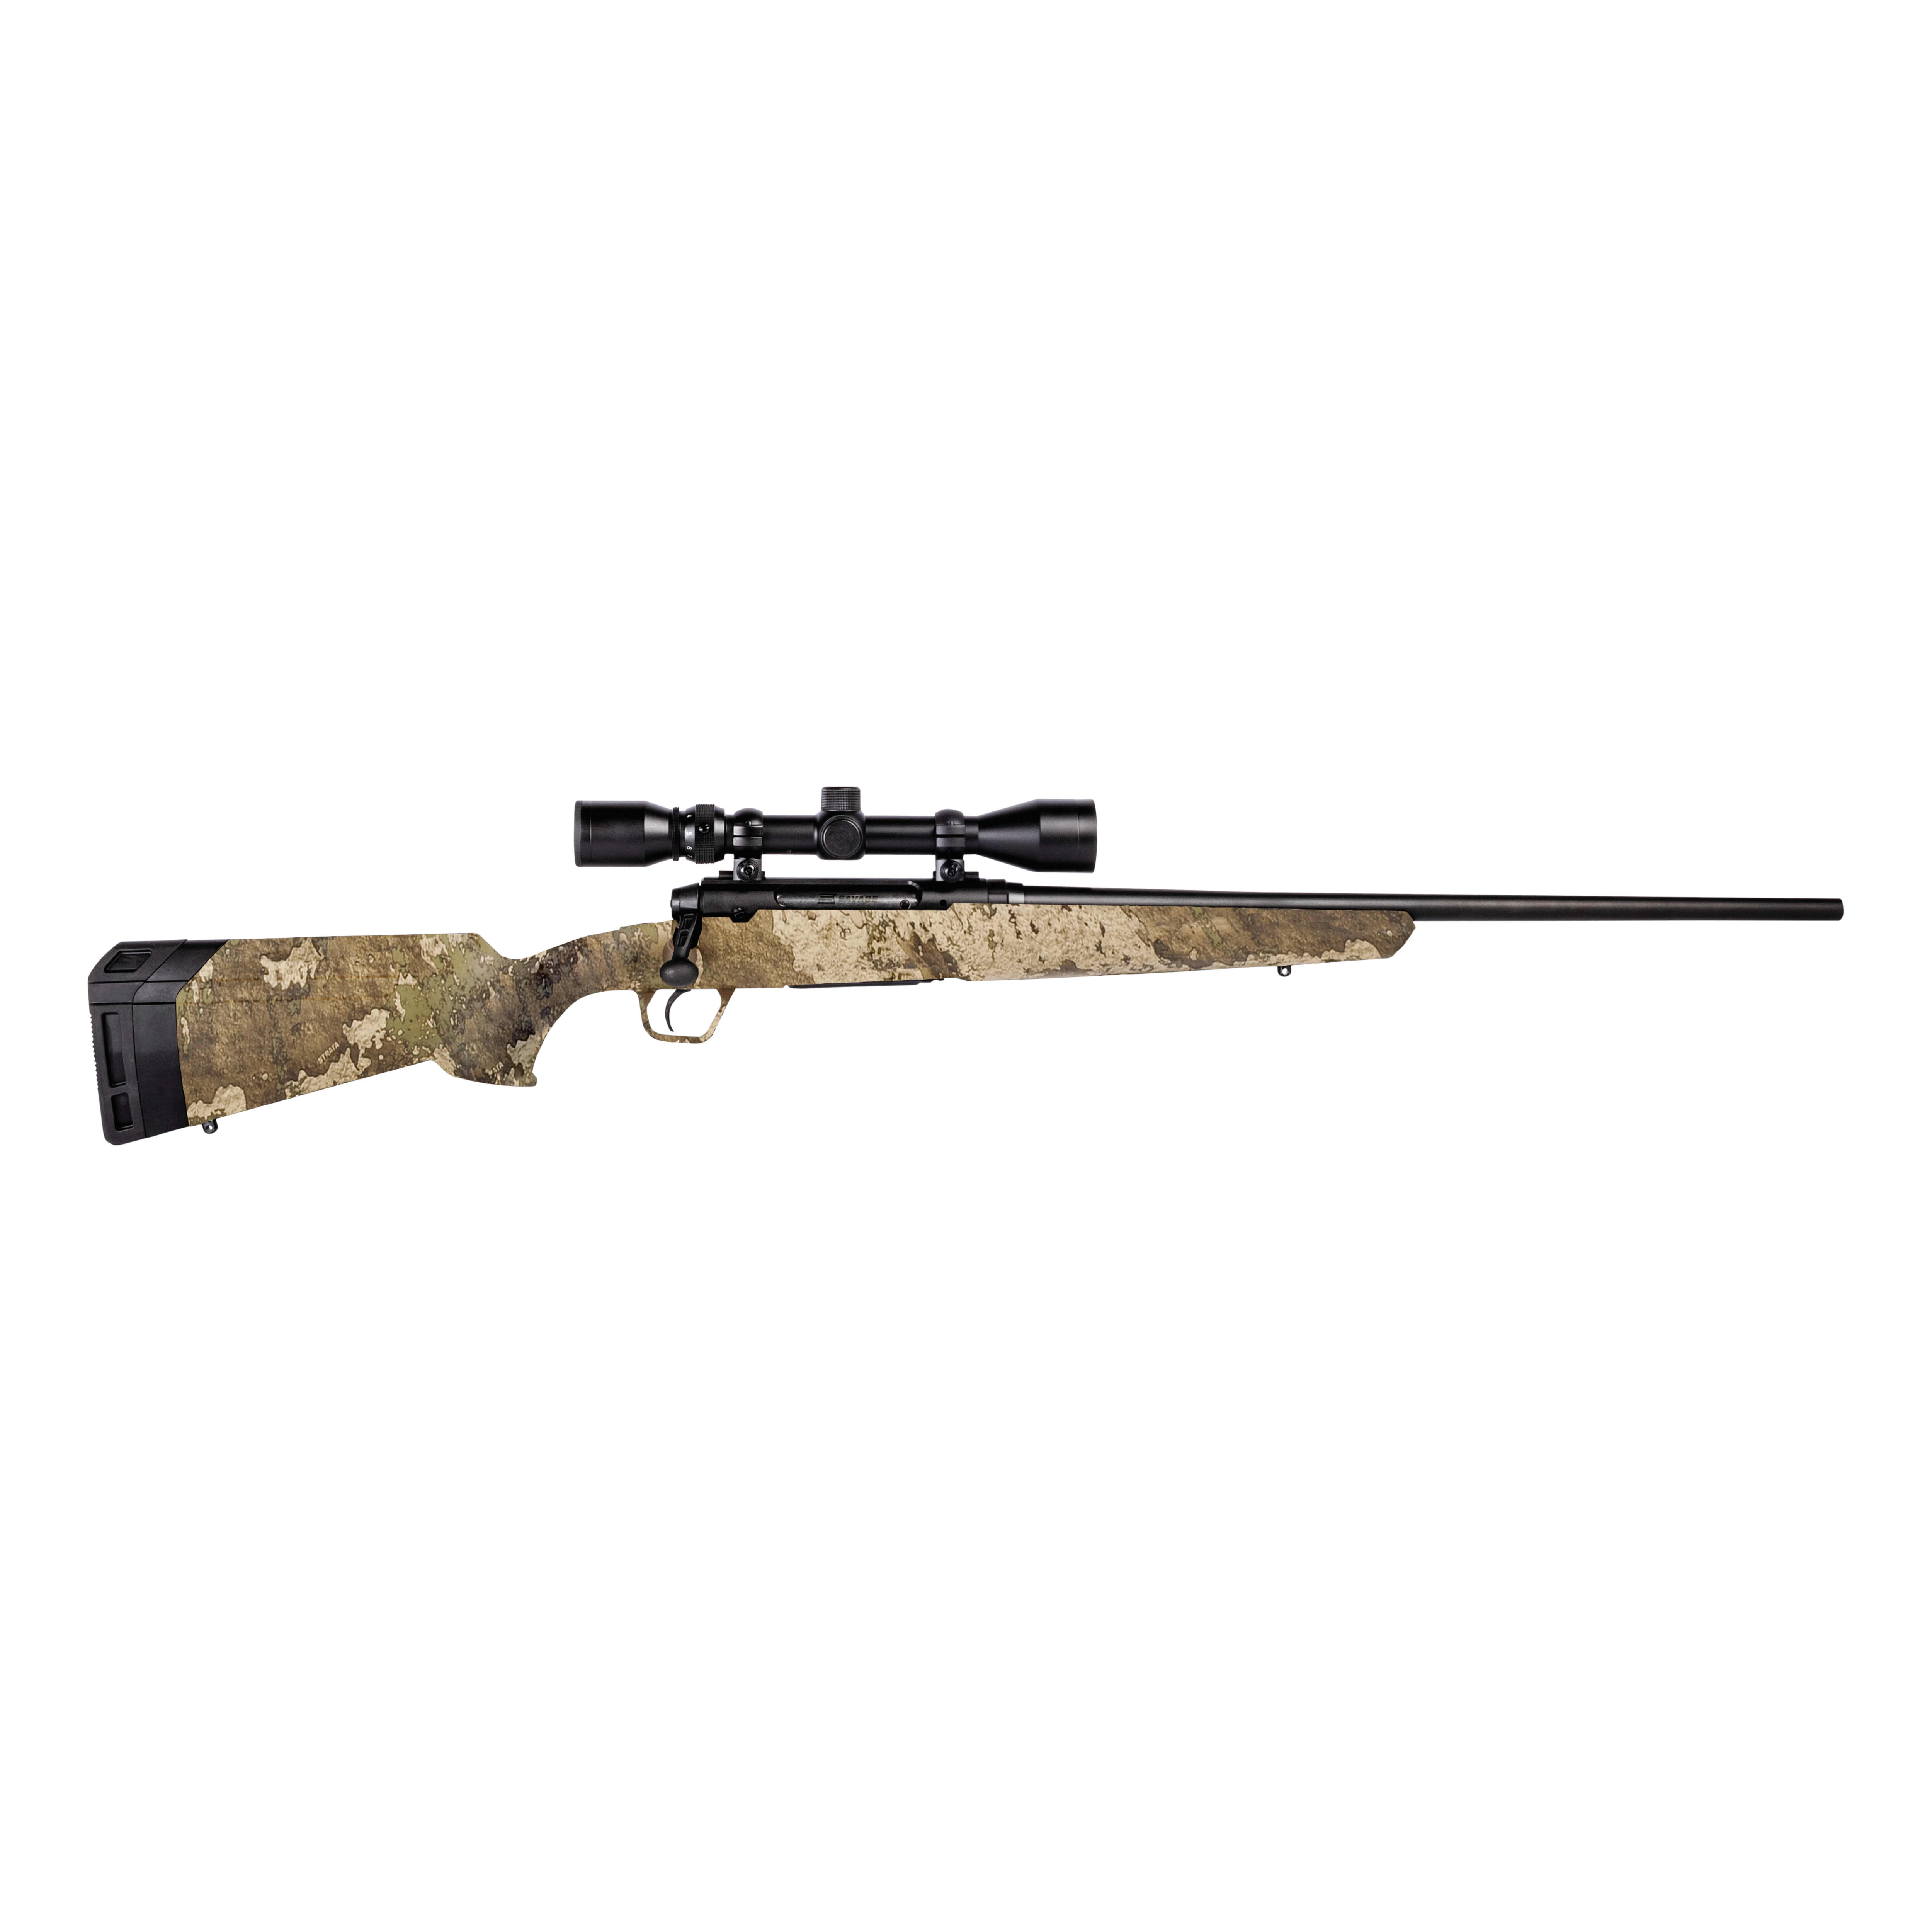 Savage® Axis XP Bolt-Action Rifle in TrueTimber® Strata Camo